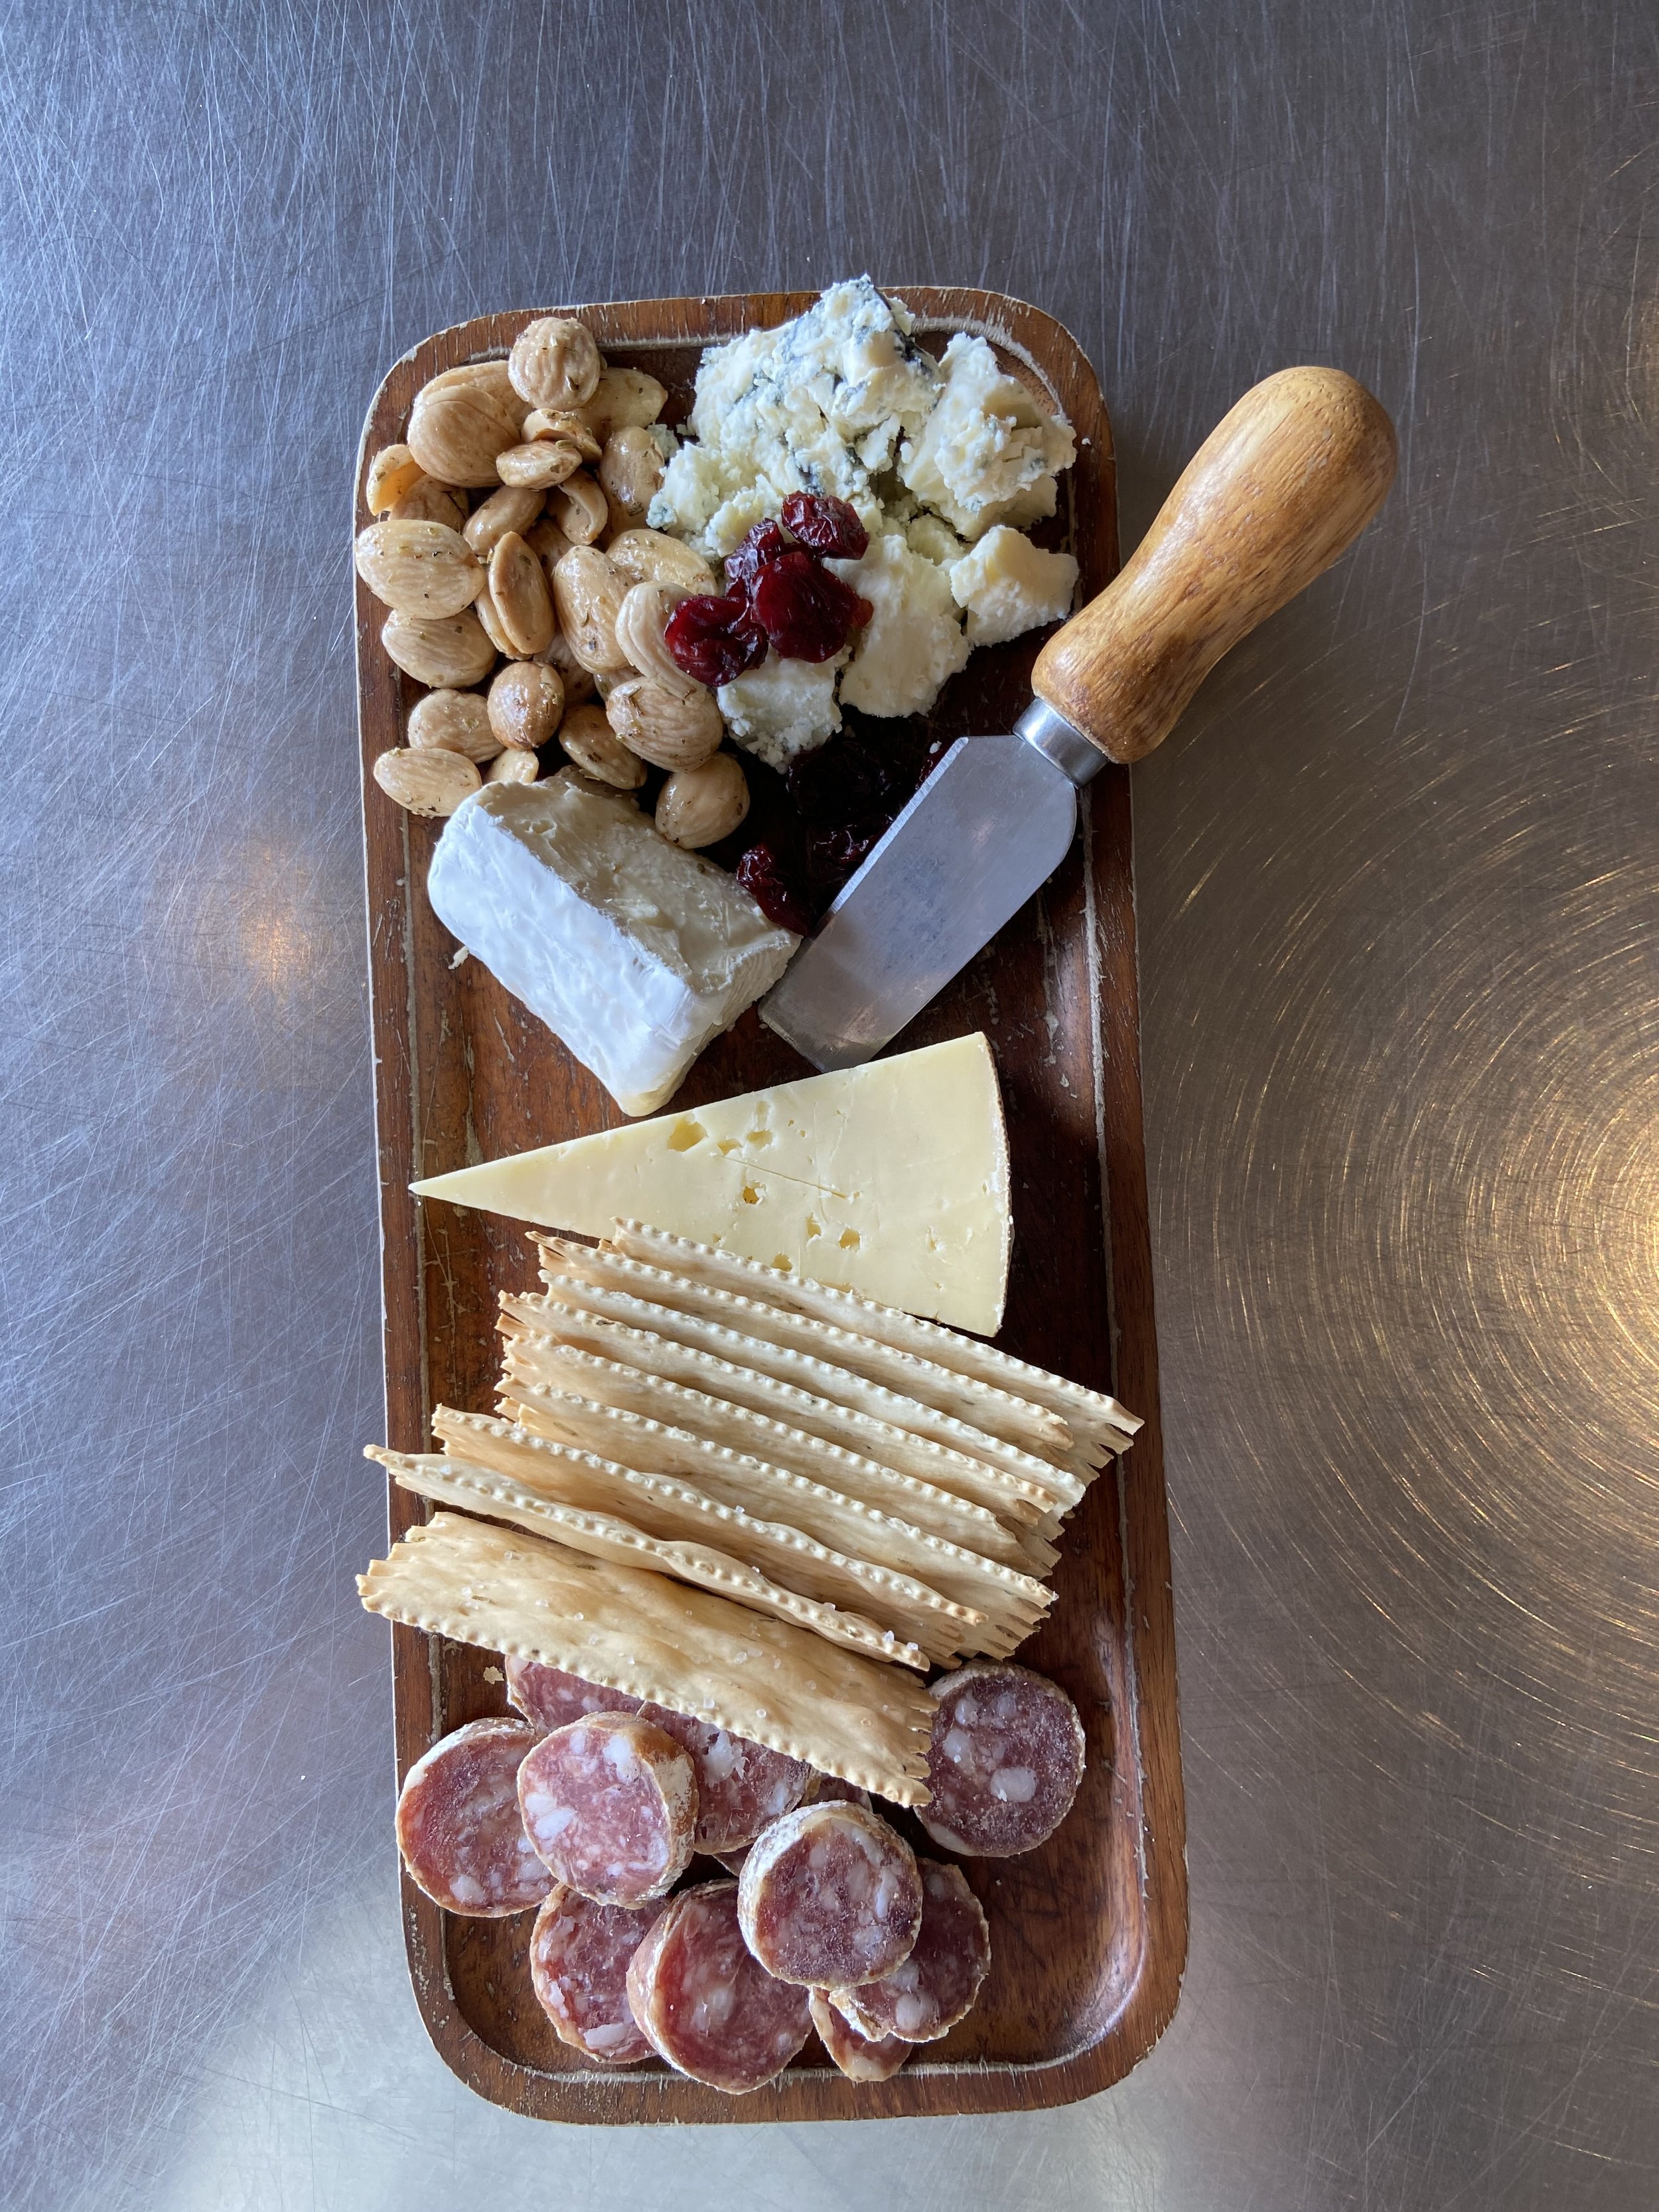 meat and cheese plate.jpg